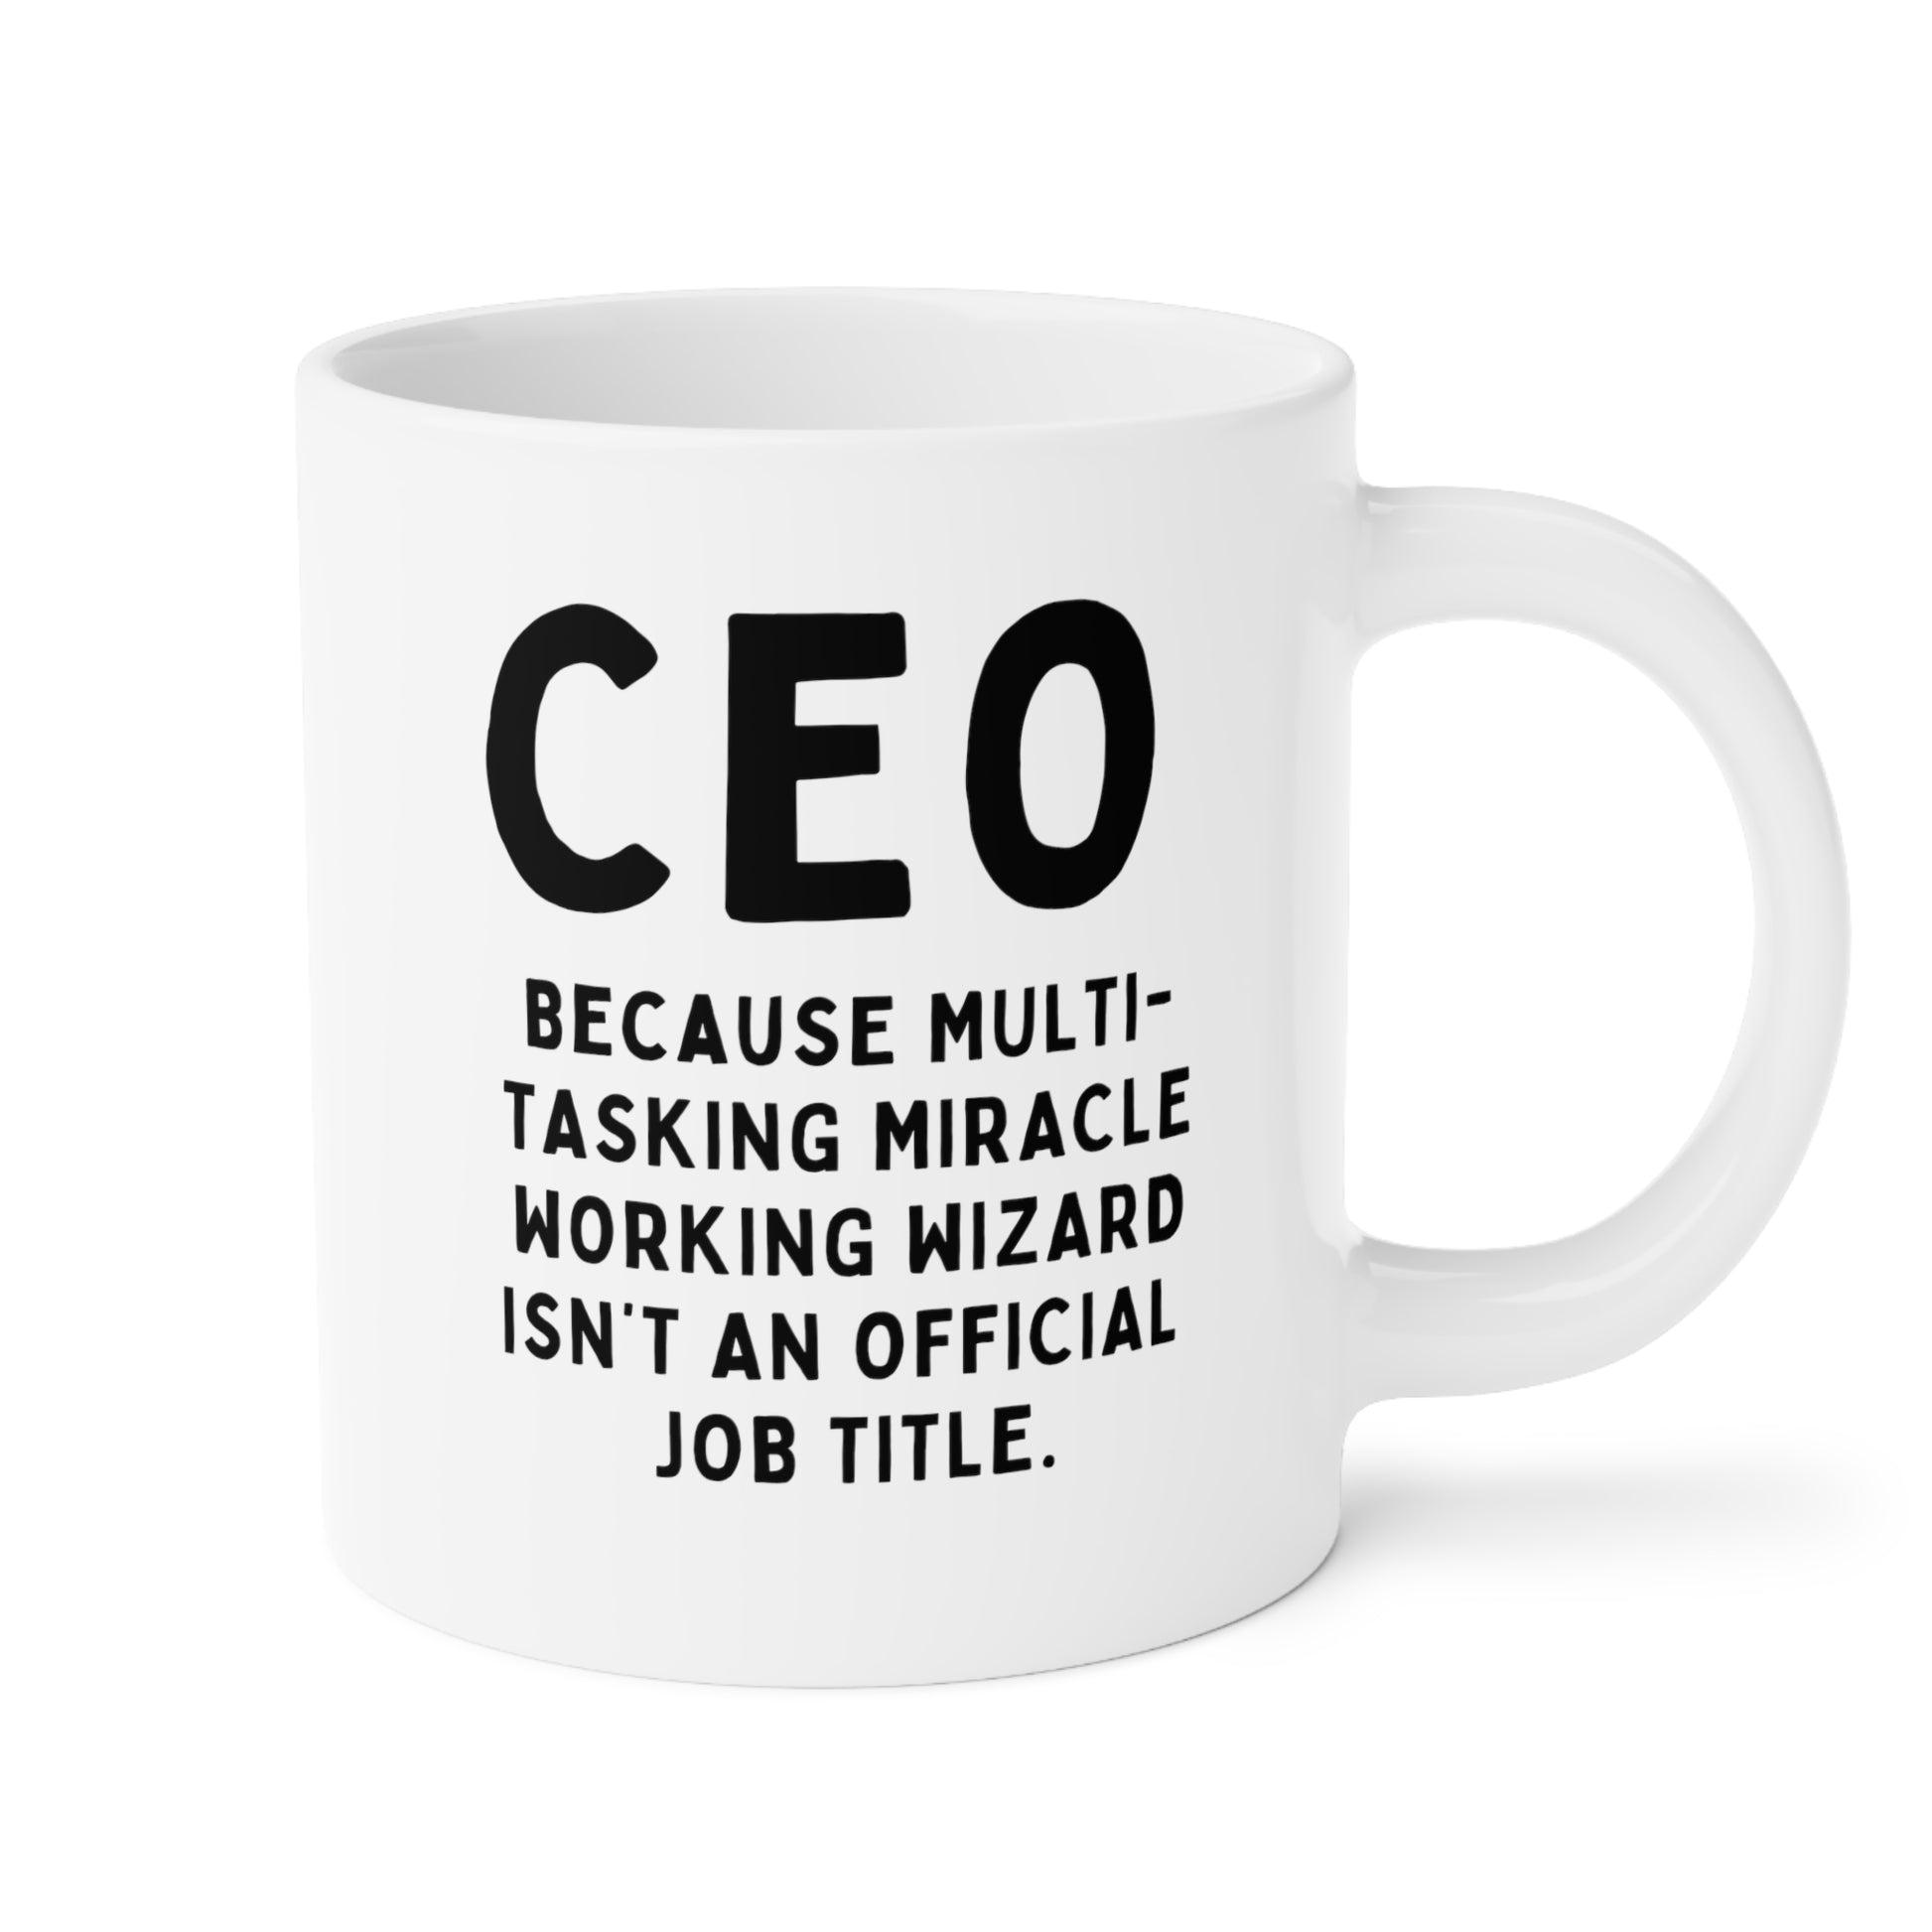 CEO Because Multi-tasking Miracle Working Wizard Isnt An Official Job Title 20oz white funny large coffee mug gift for boss job work office waveywares wavey wares wavywares wavy wares